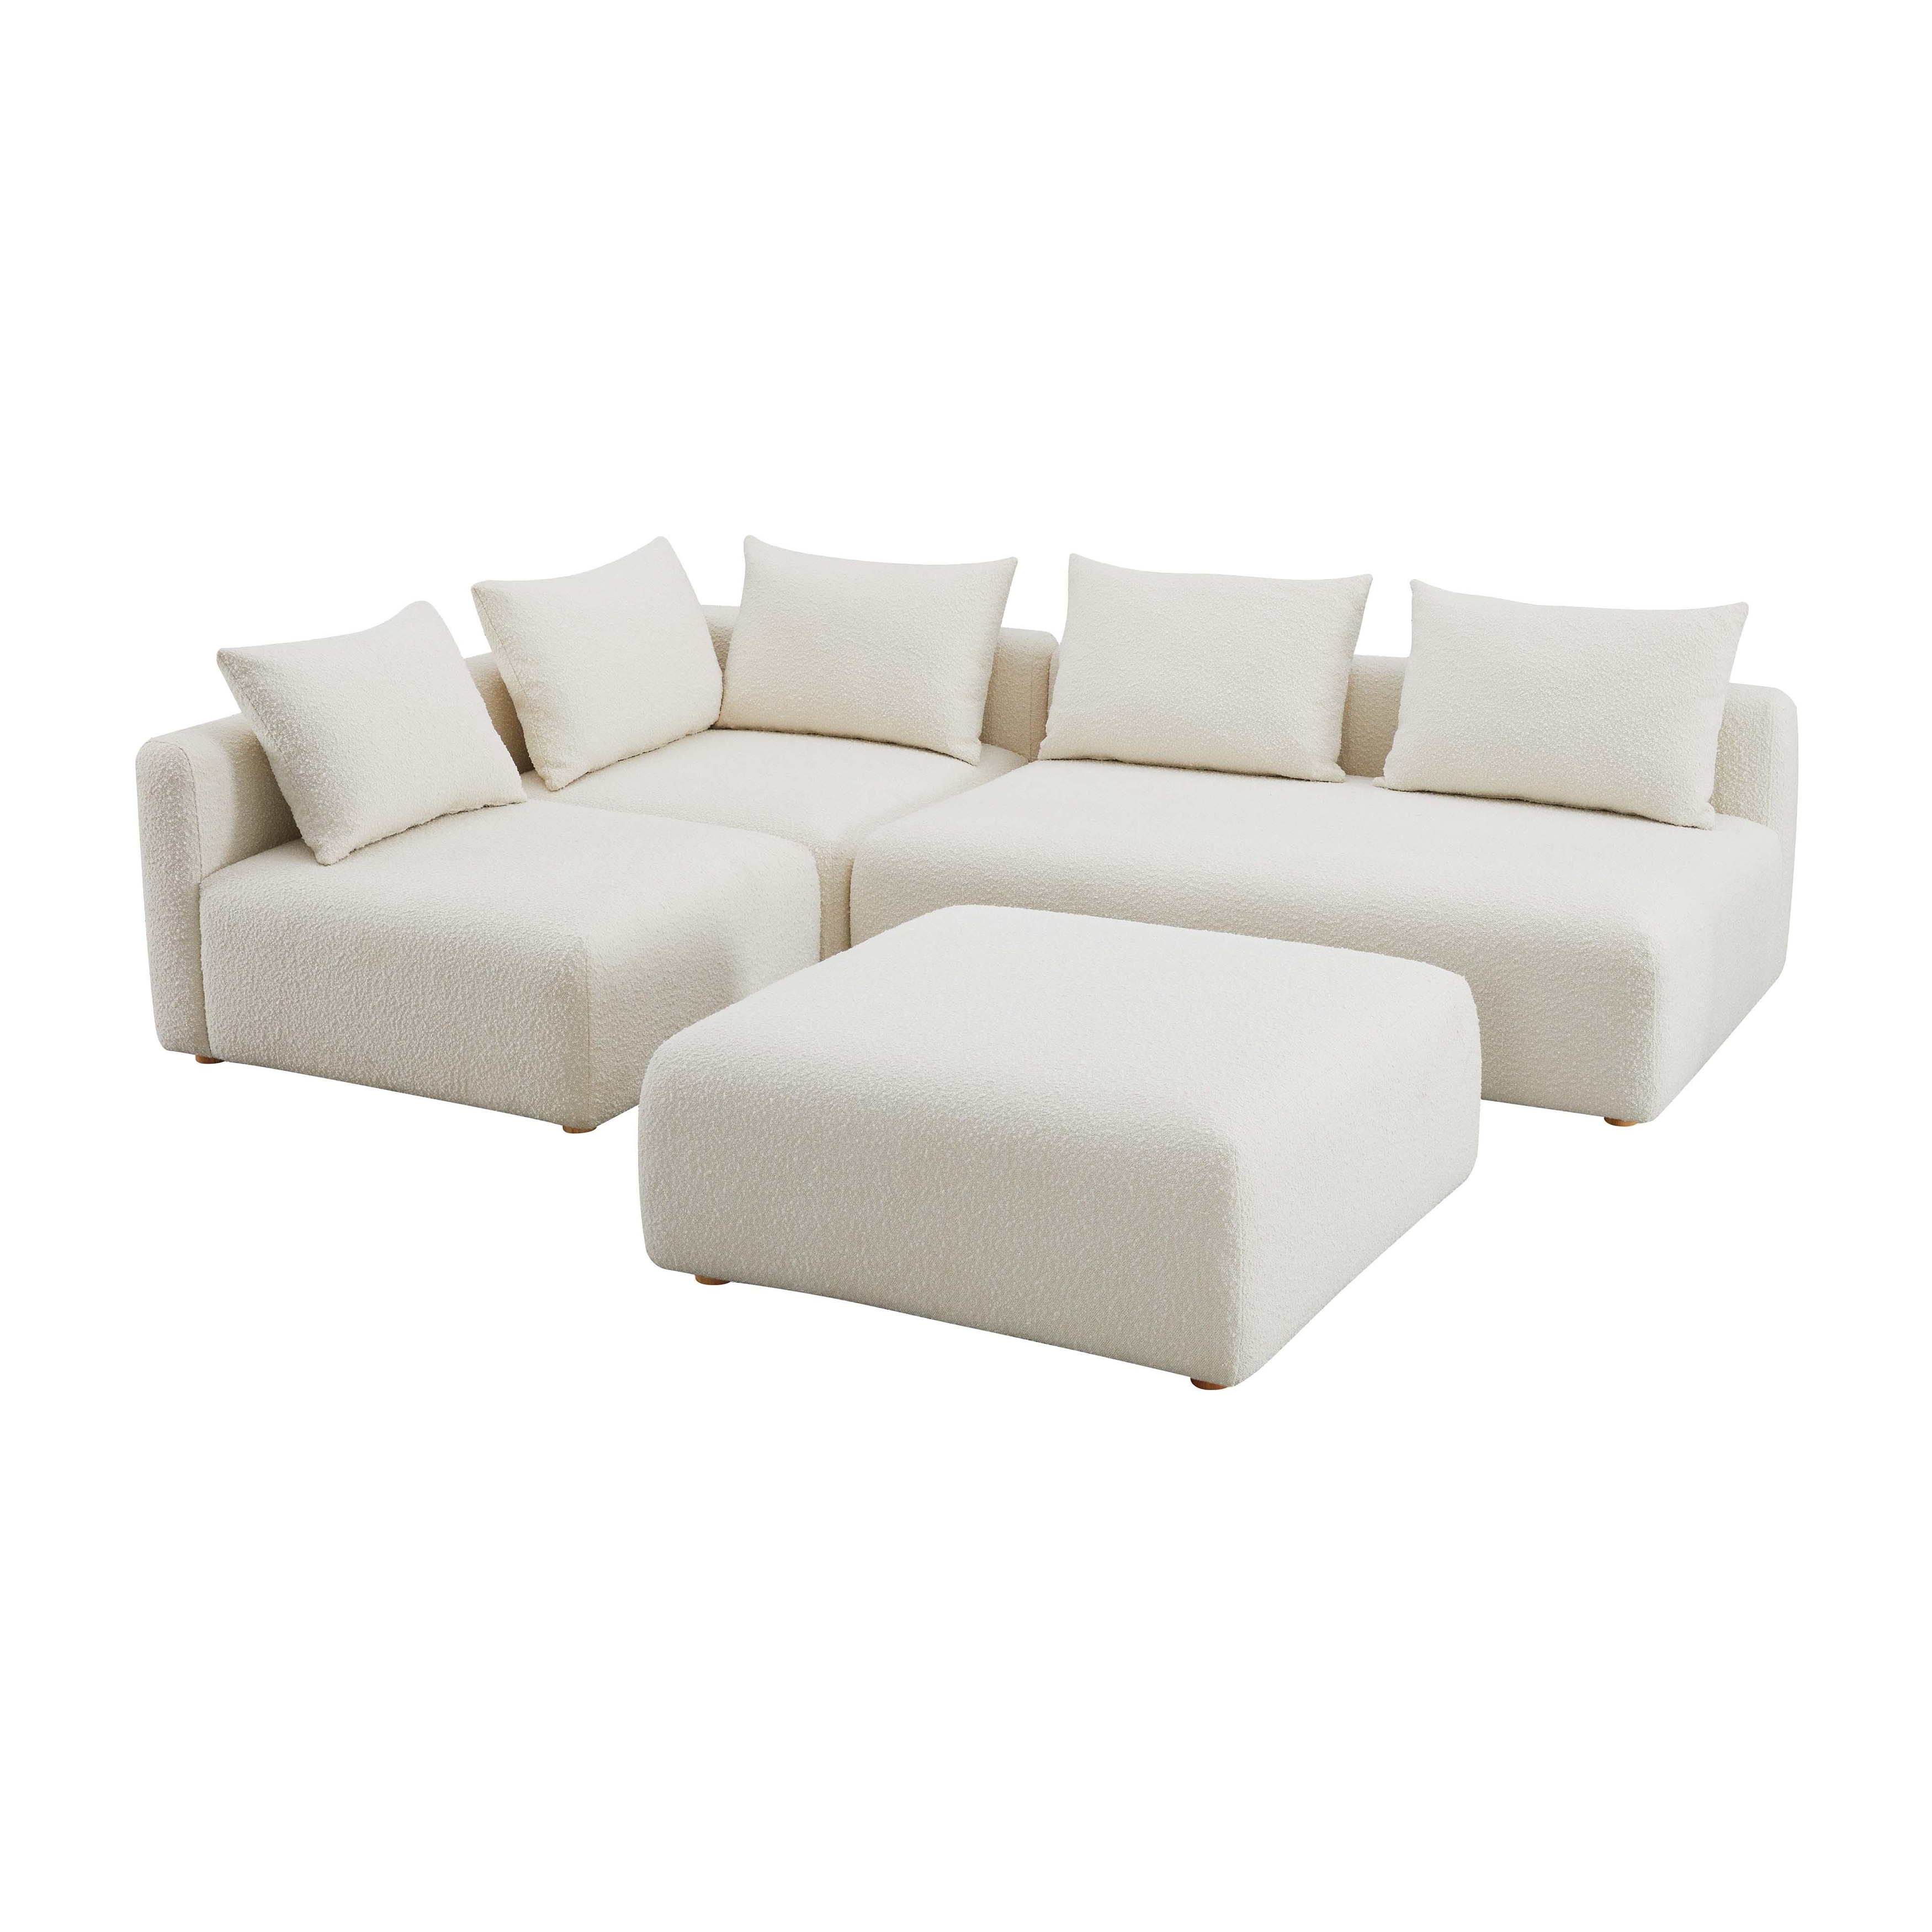 Hangover Cream Upholstered 4-piece Modular Chaise Sectional